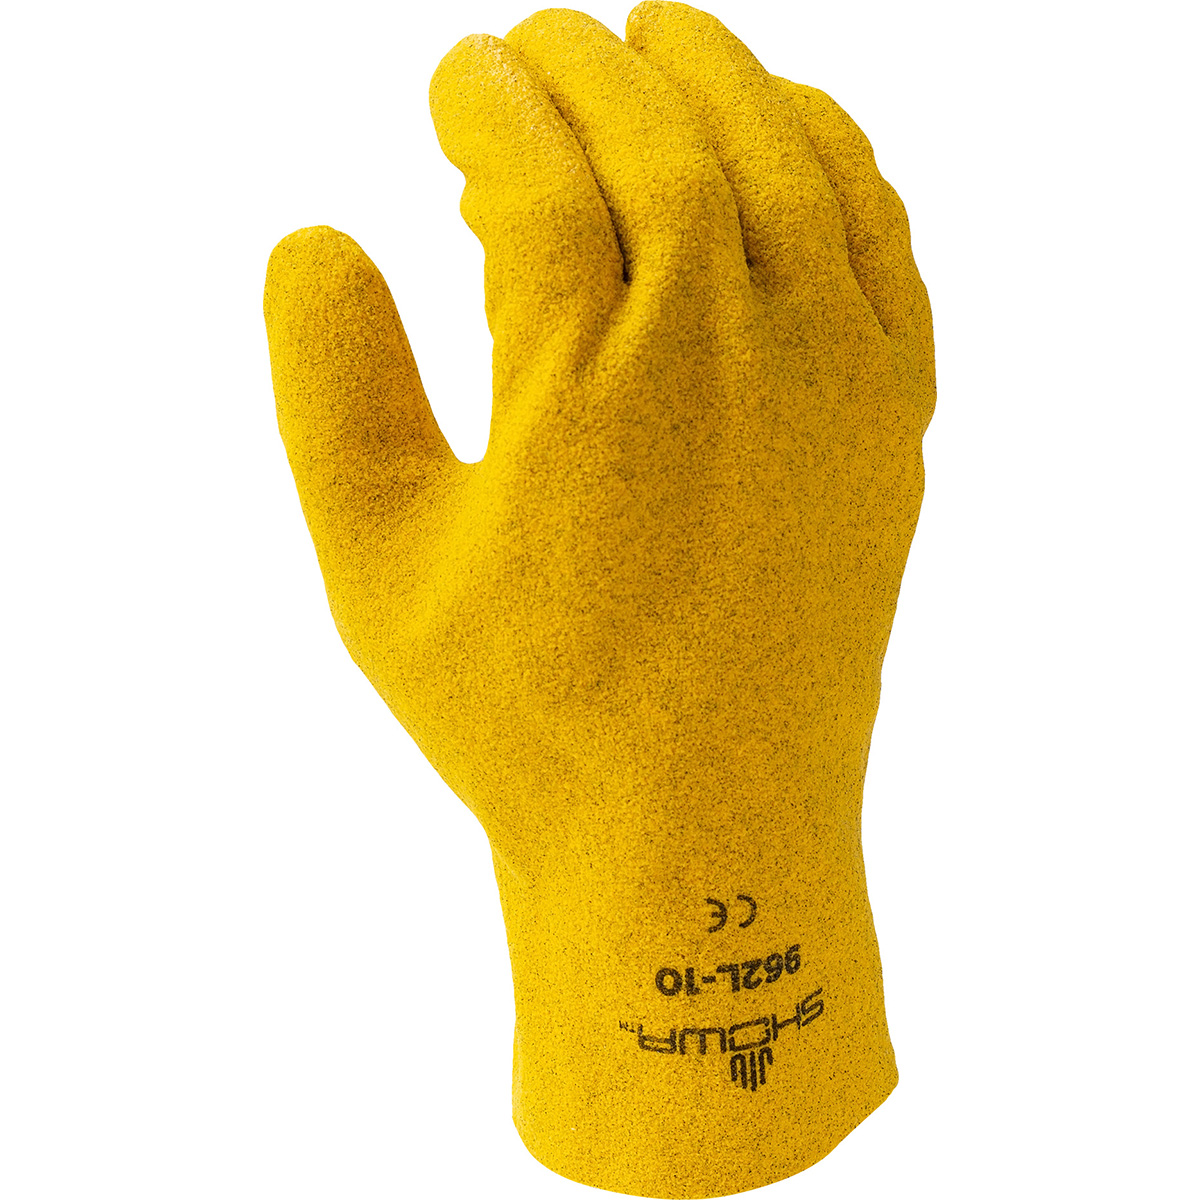 General purpose PVC fully coated, yellow, jersey liner, slip-on, large - General Purpose